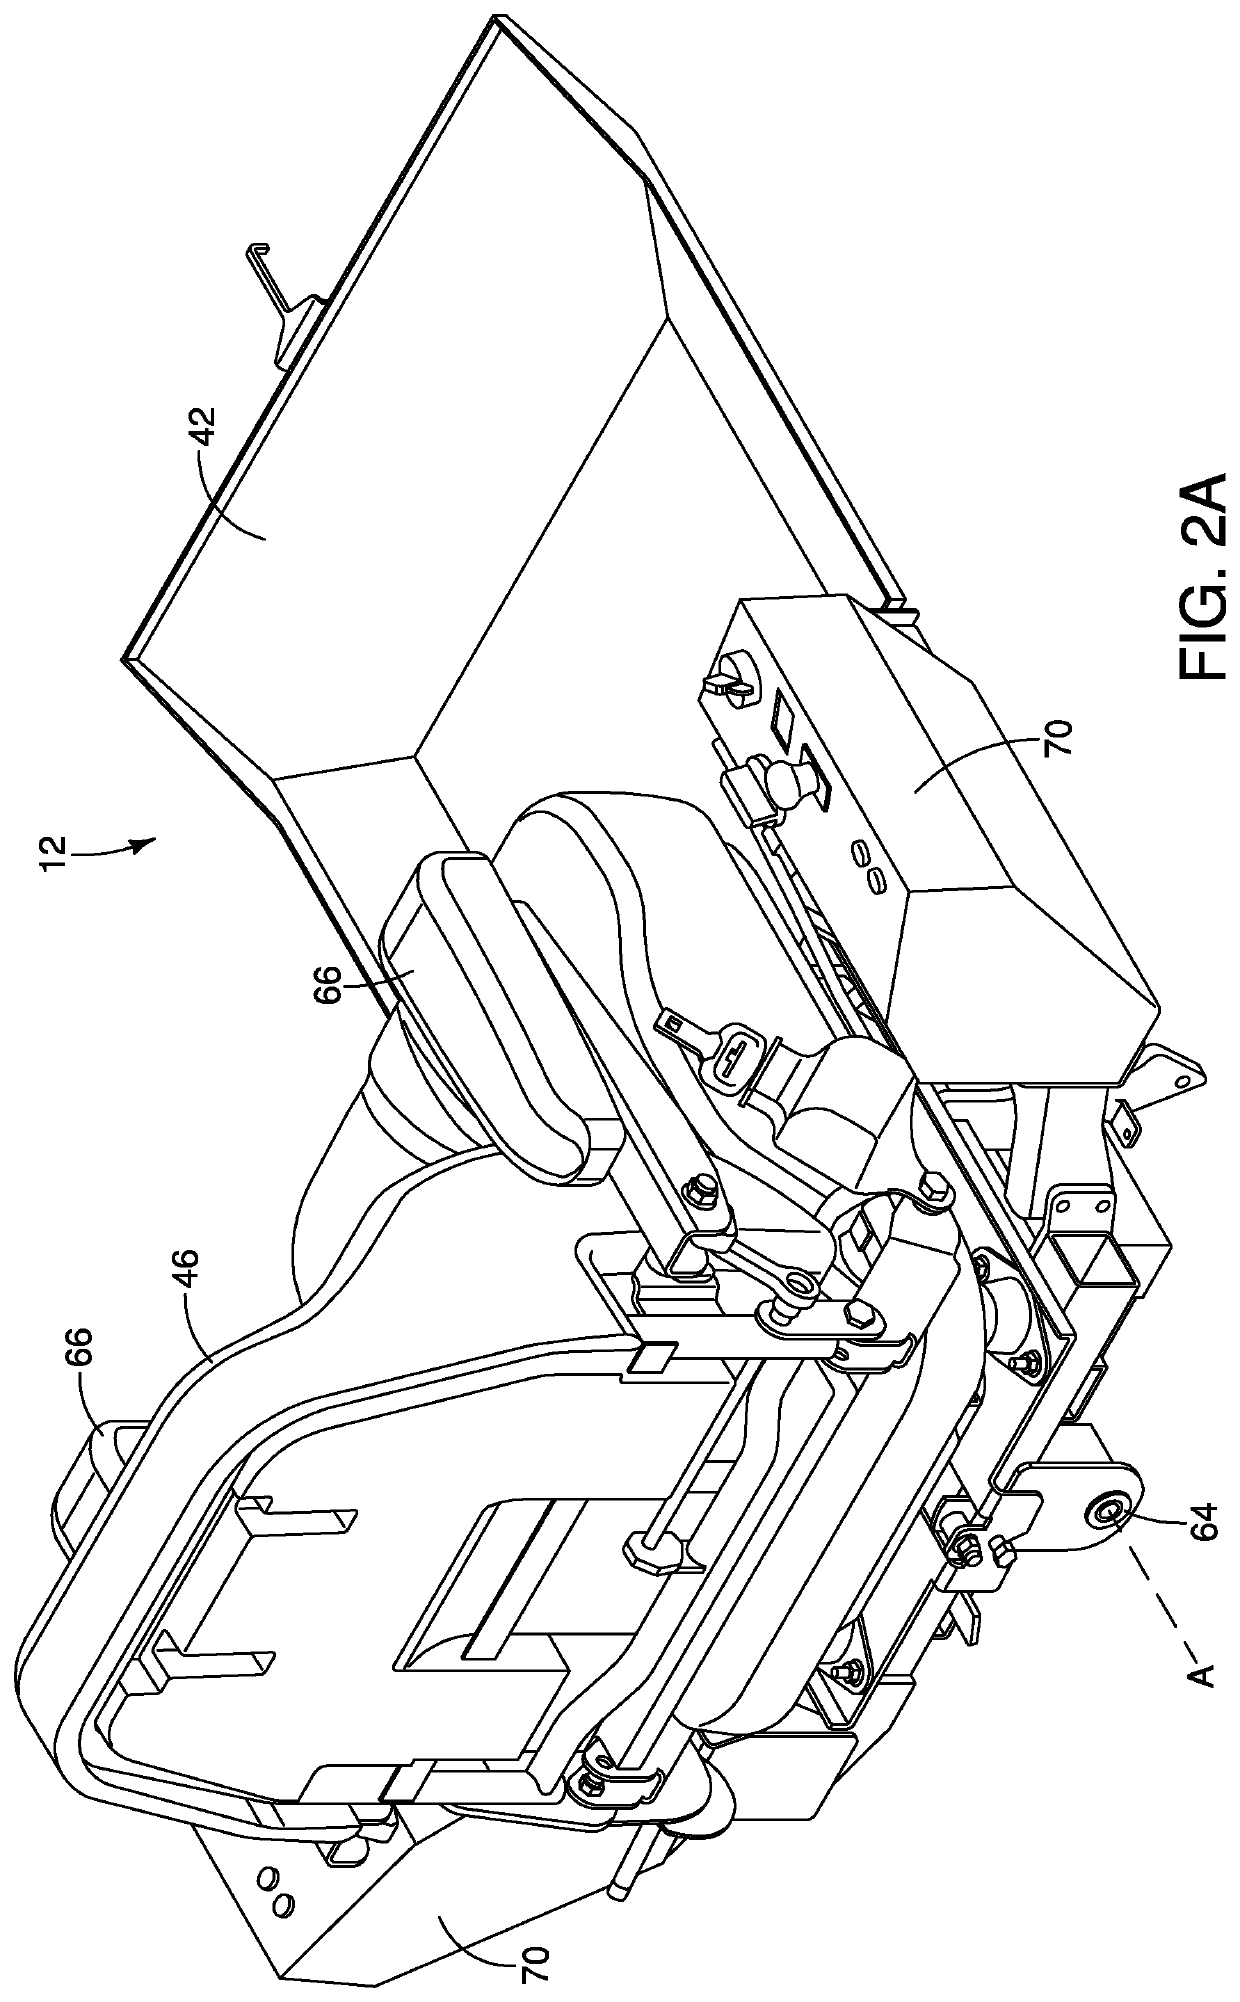 Adjustable seat assembly for a lawn maintenance vehicle